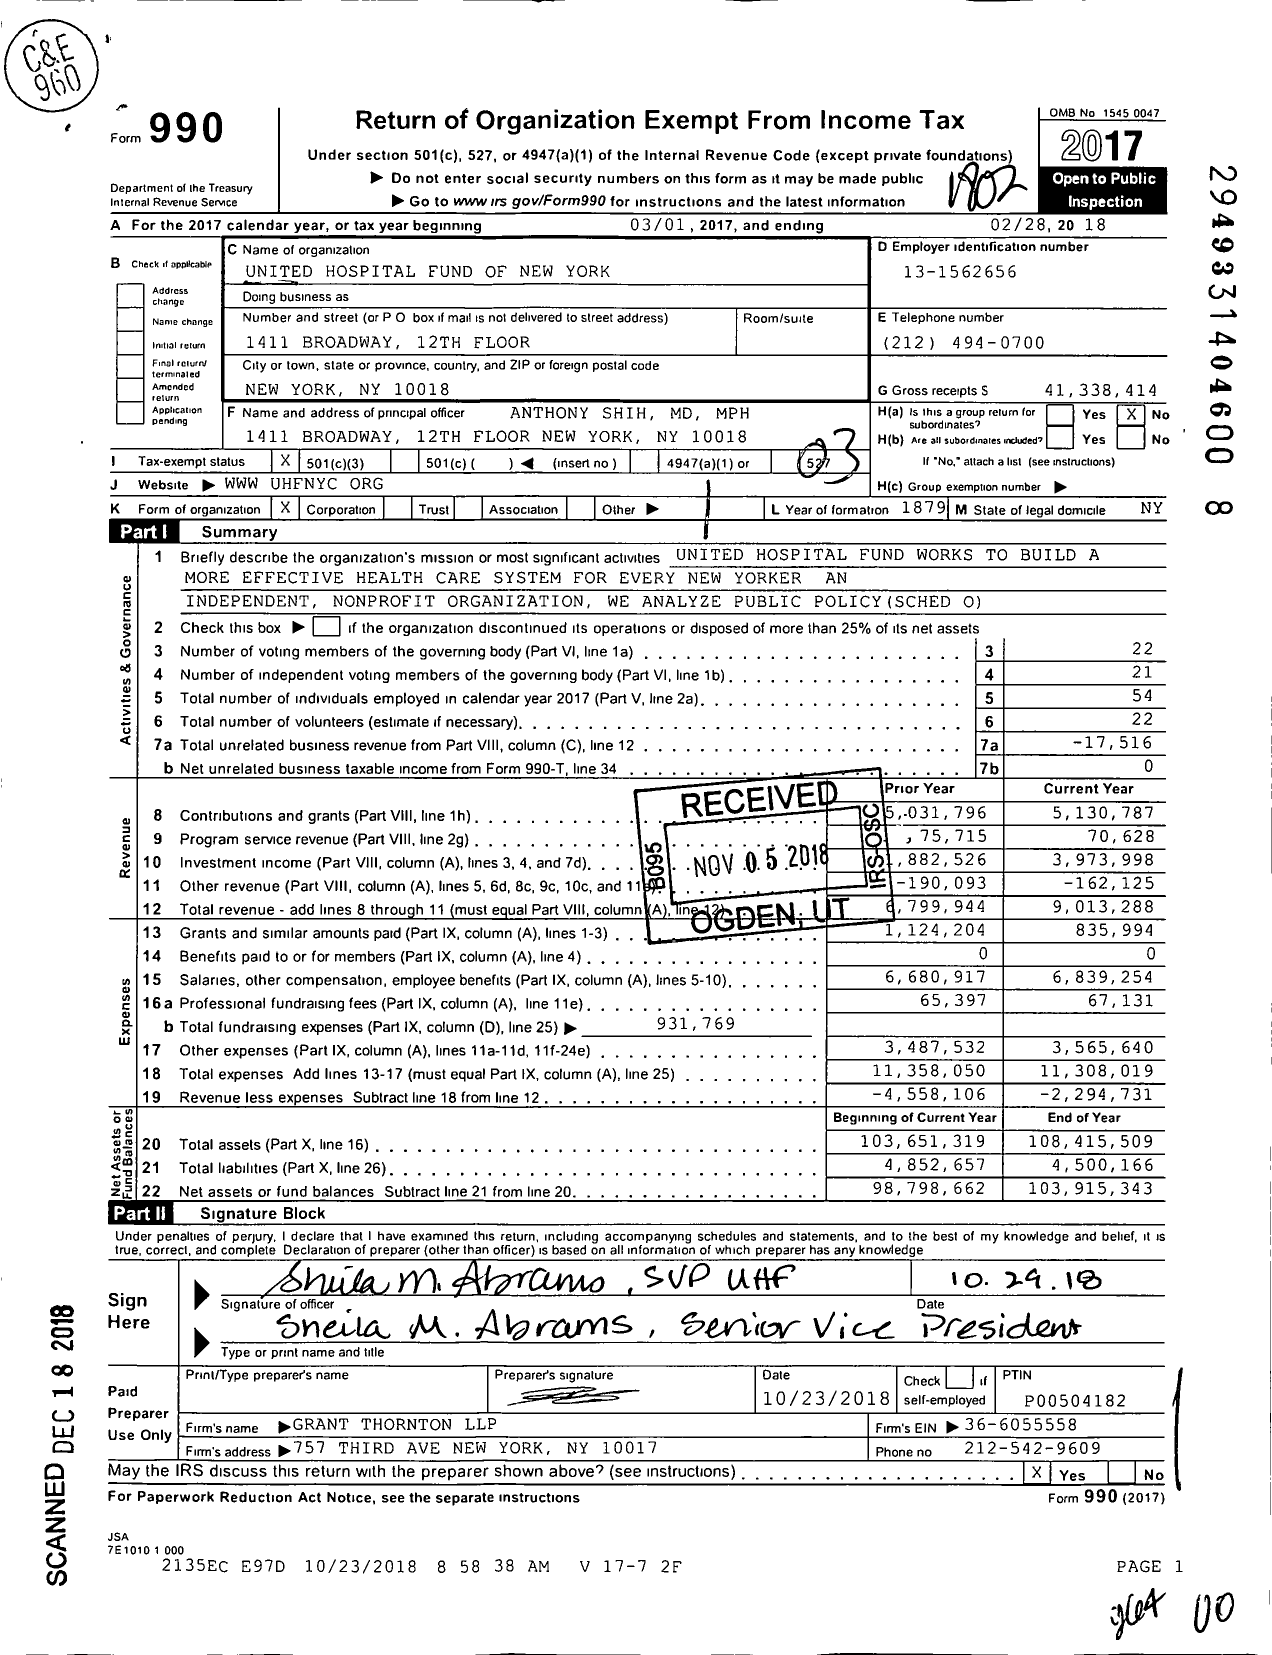 Image of first page of 2017 Form 990 for United Hospital Fund of New York (UHF)